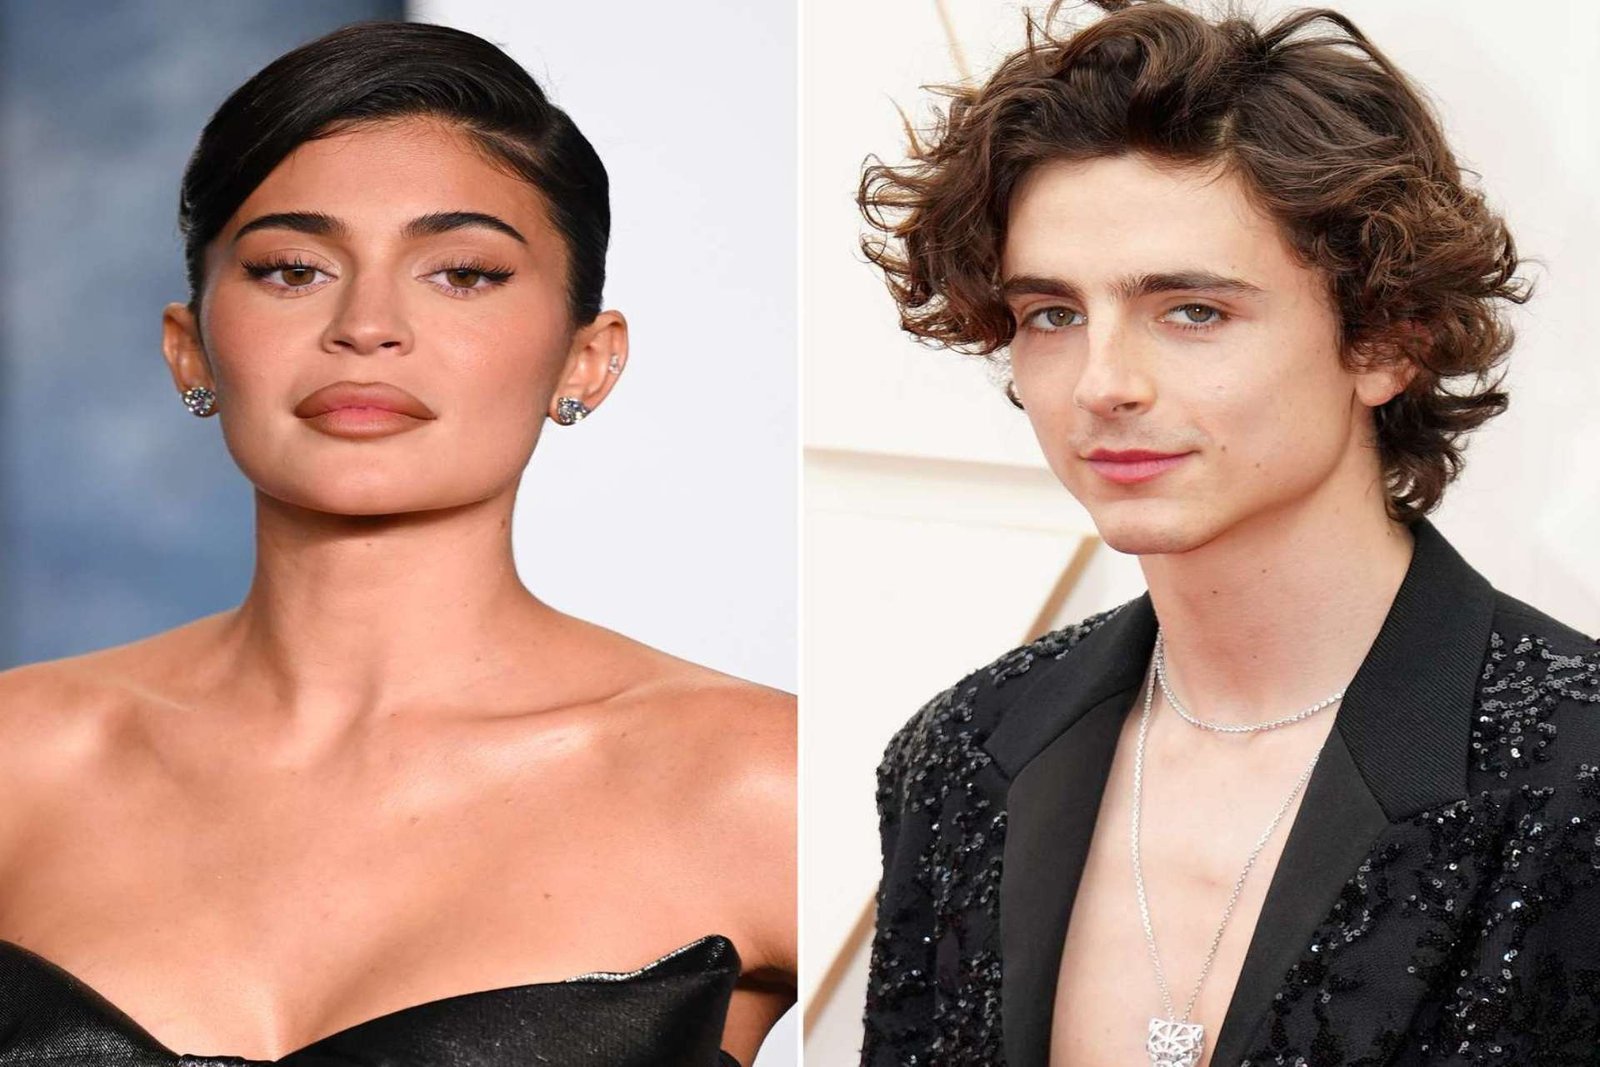 Timothée Chalamet and Kylie Jenner Rumored to Have Parted Ways